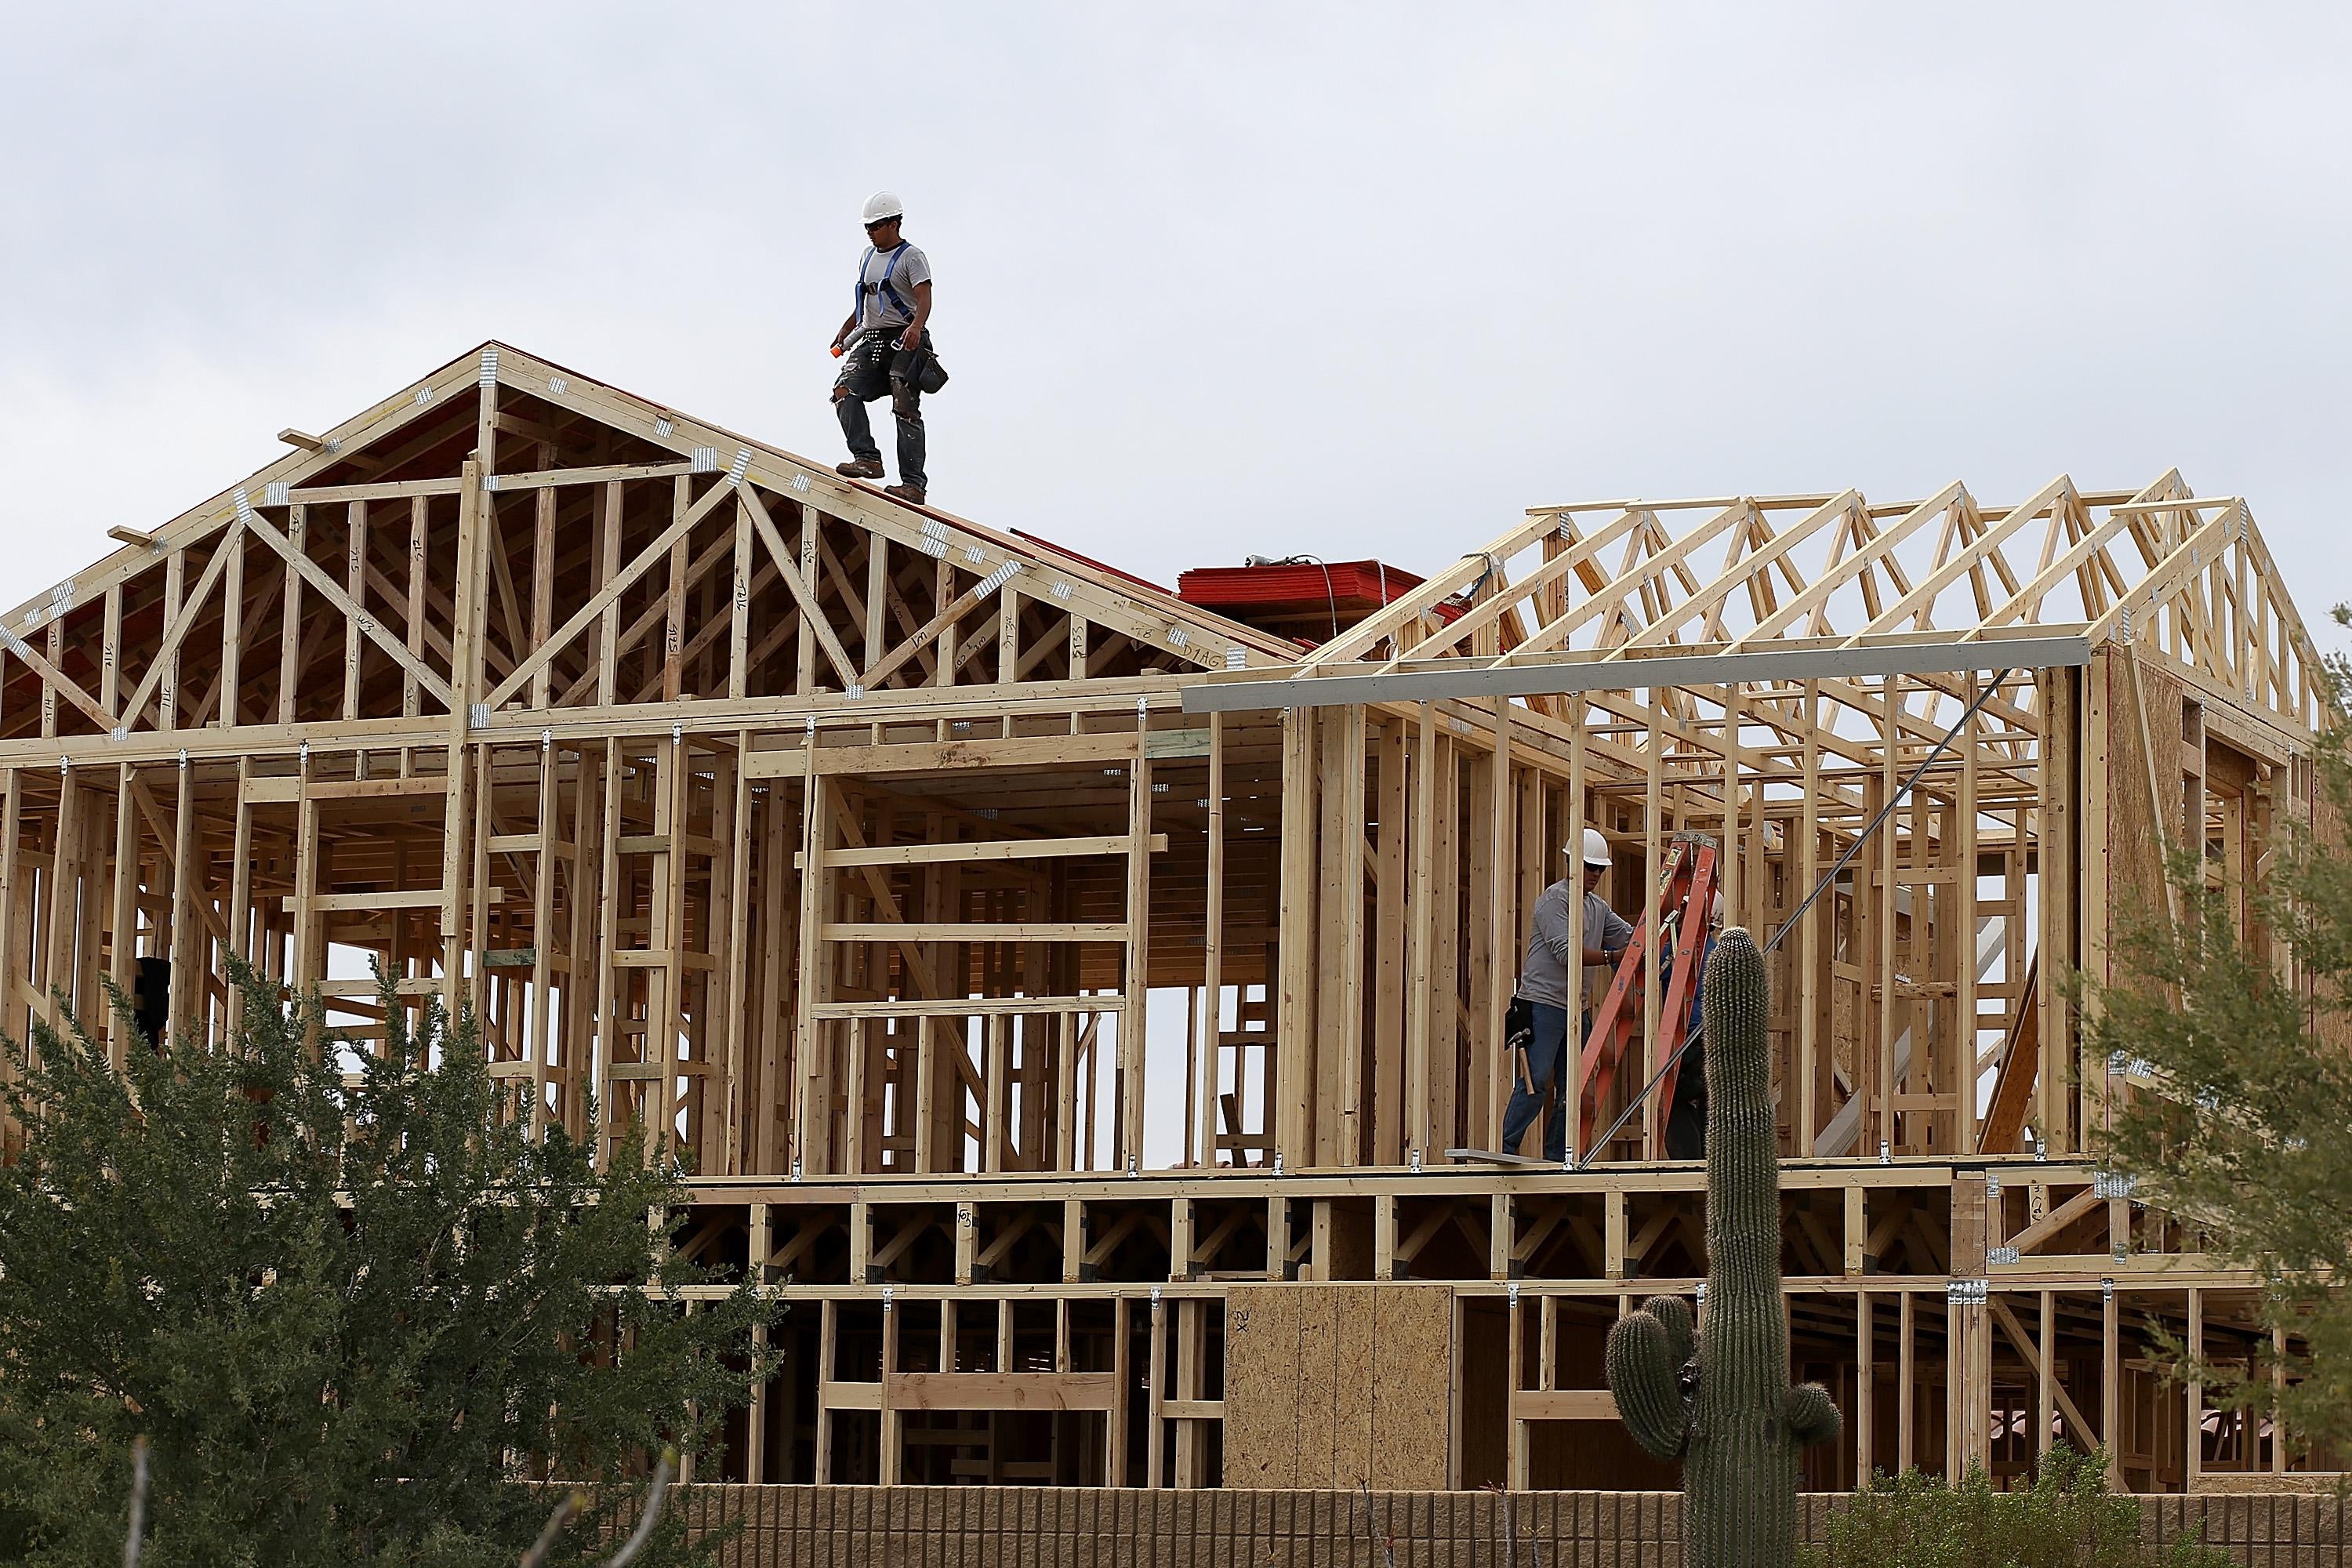 A worker climbs on the roof of a home under construction.